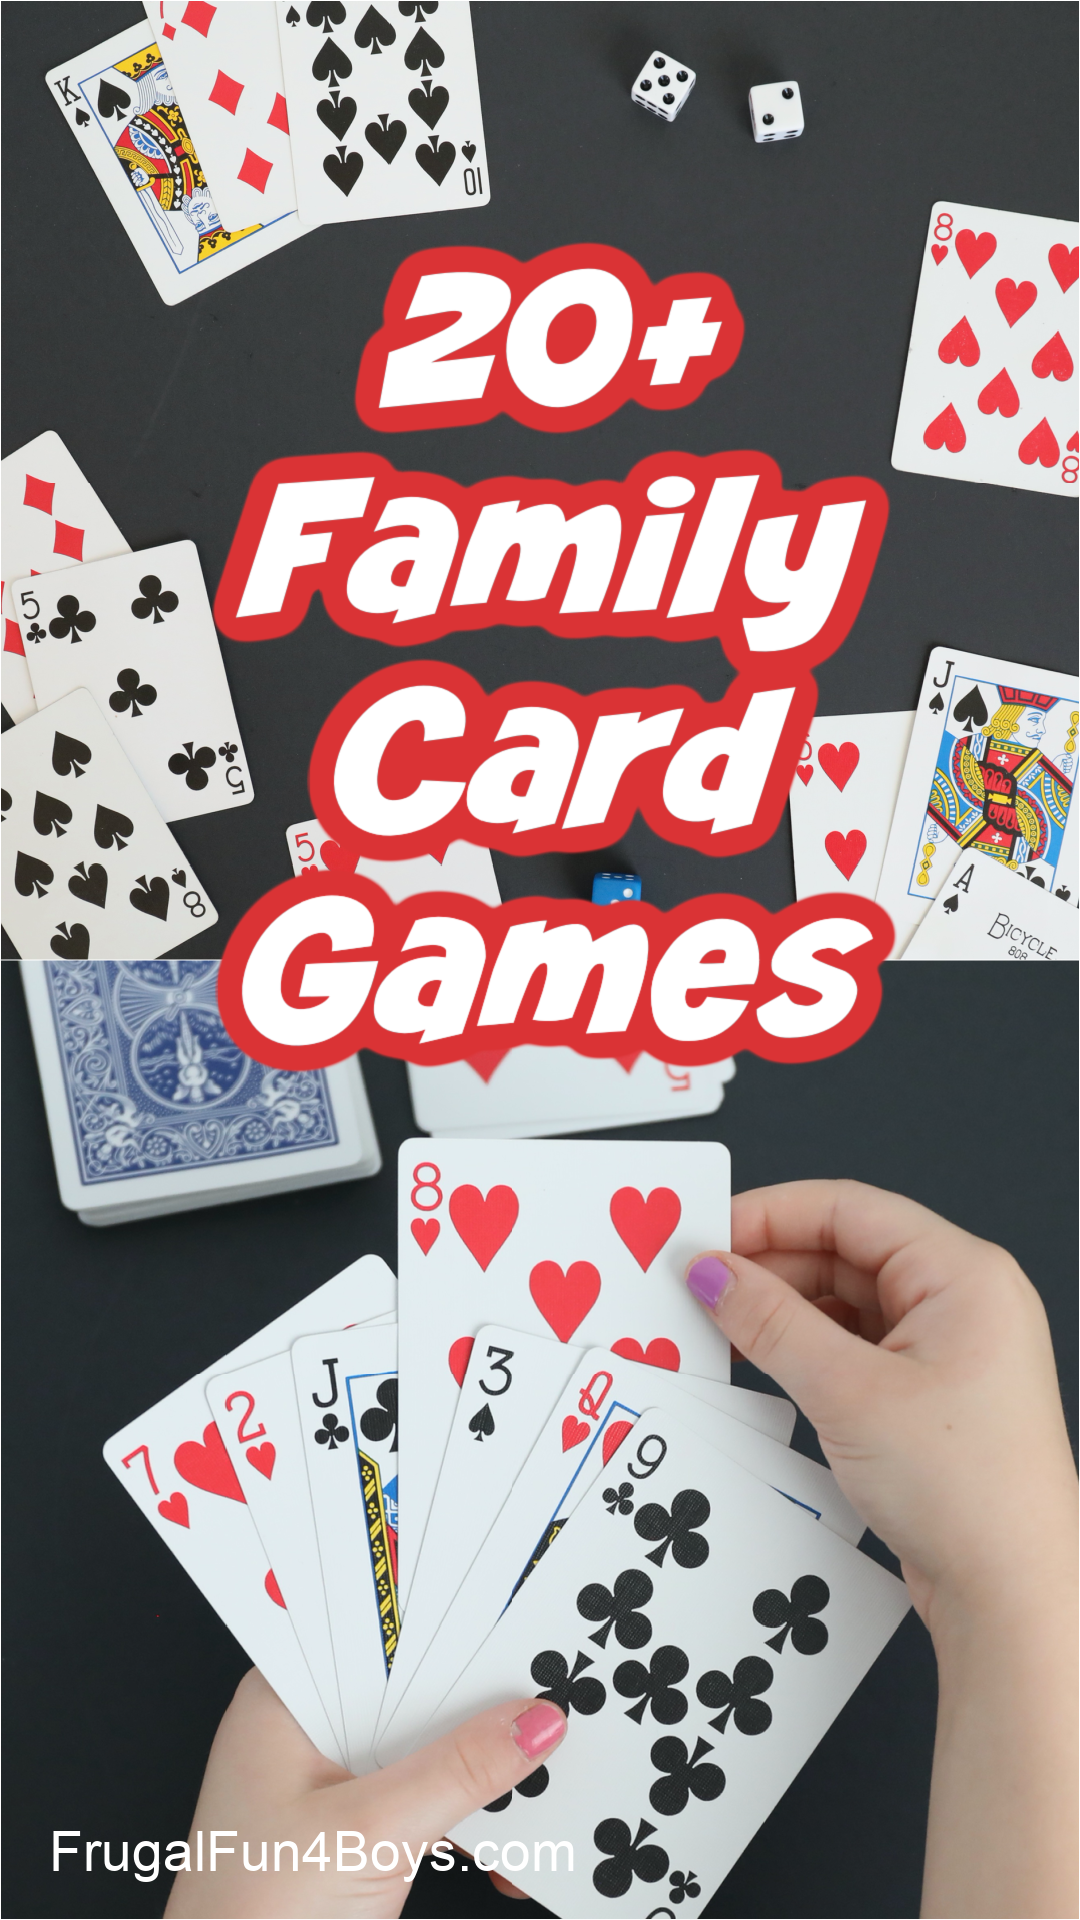 Card Games Speed Cups Playing Cards Game Family And Children Board Games 